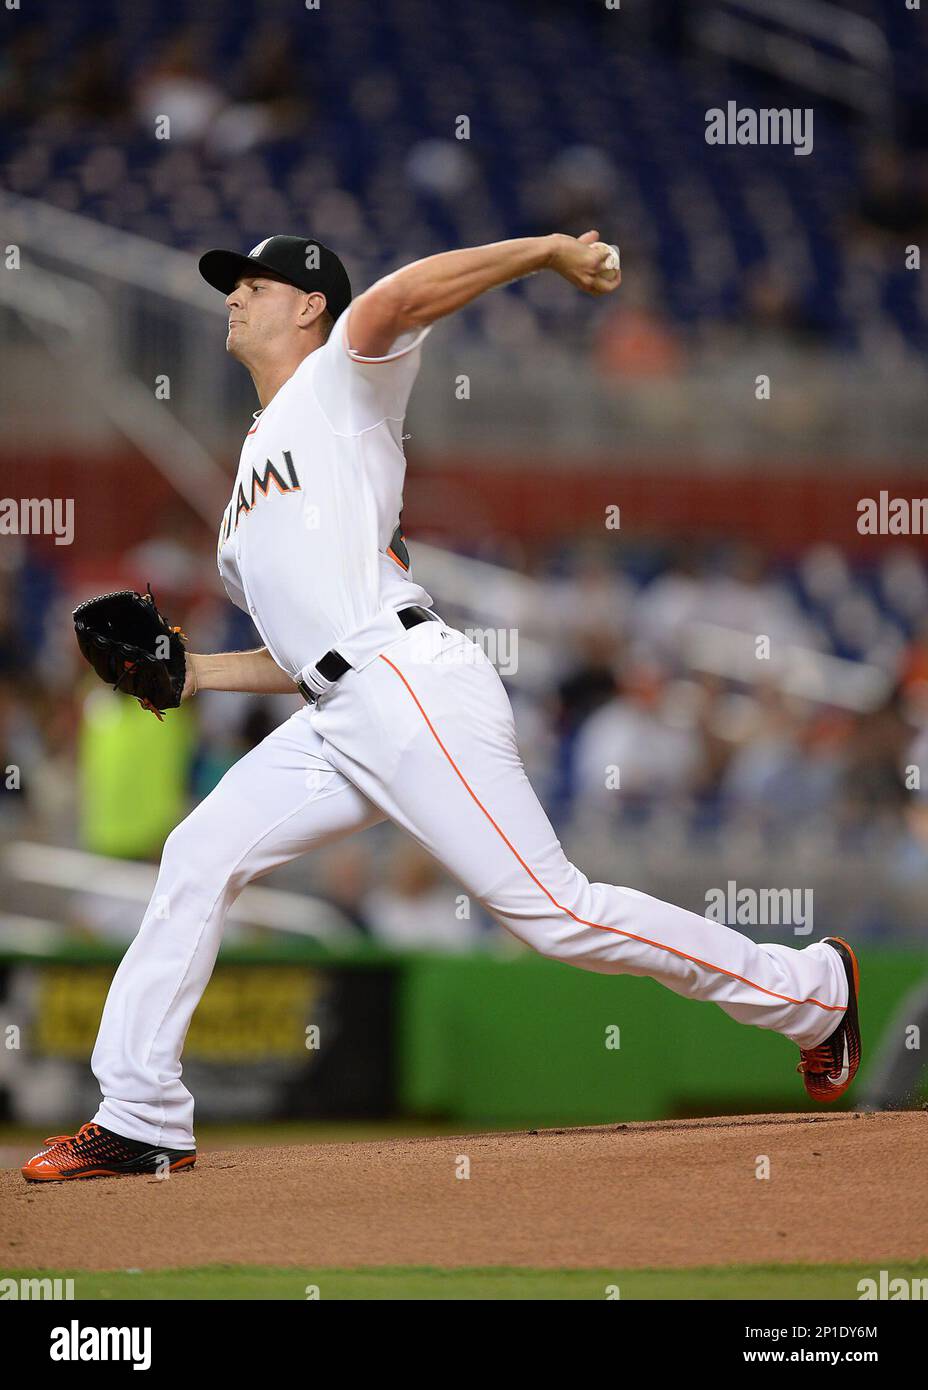 May 03, 2016 Miami Marlins relief pitcher Kyle Barraclough (46) during a  game between the Miami Marlins and the Arizona Diamondbacks at Marlins Park  in Miami, FL (Photo by JCS/Icon Sportswire) (Icon